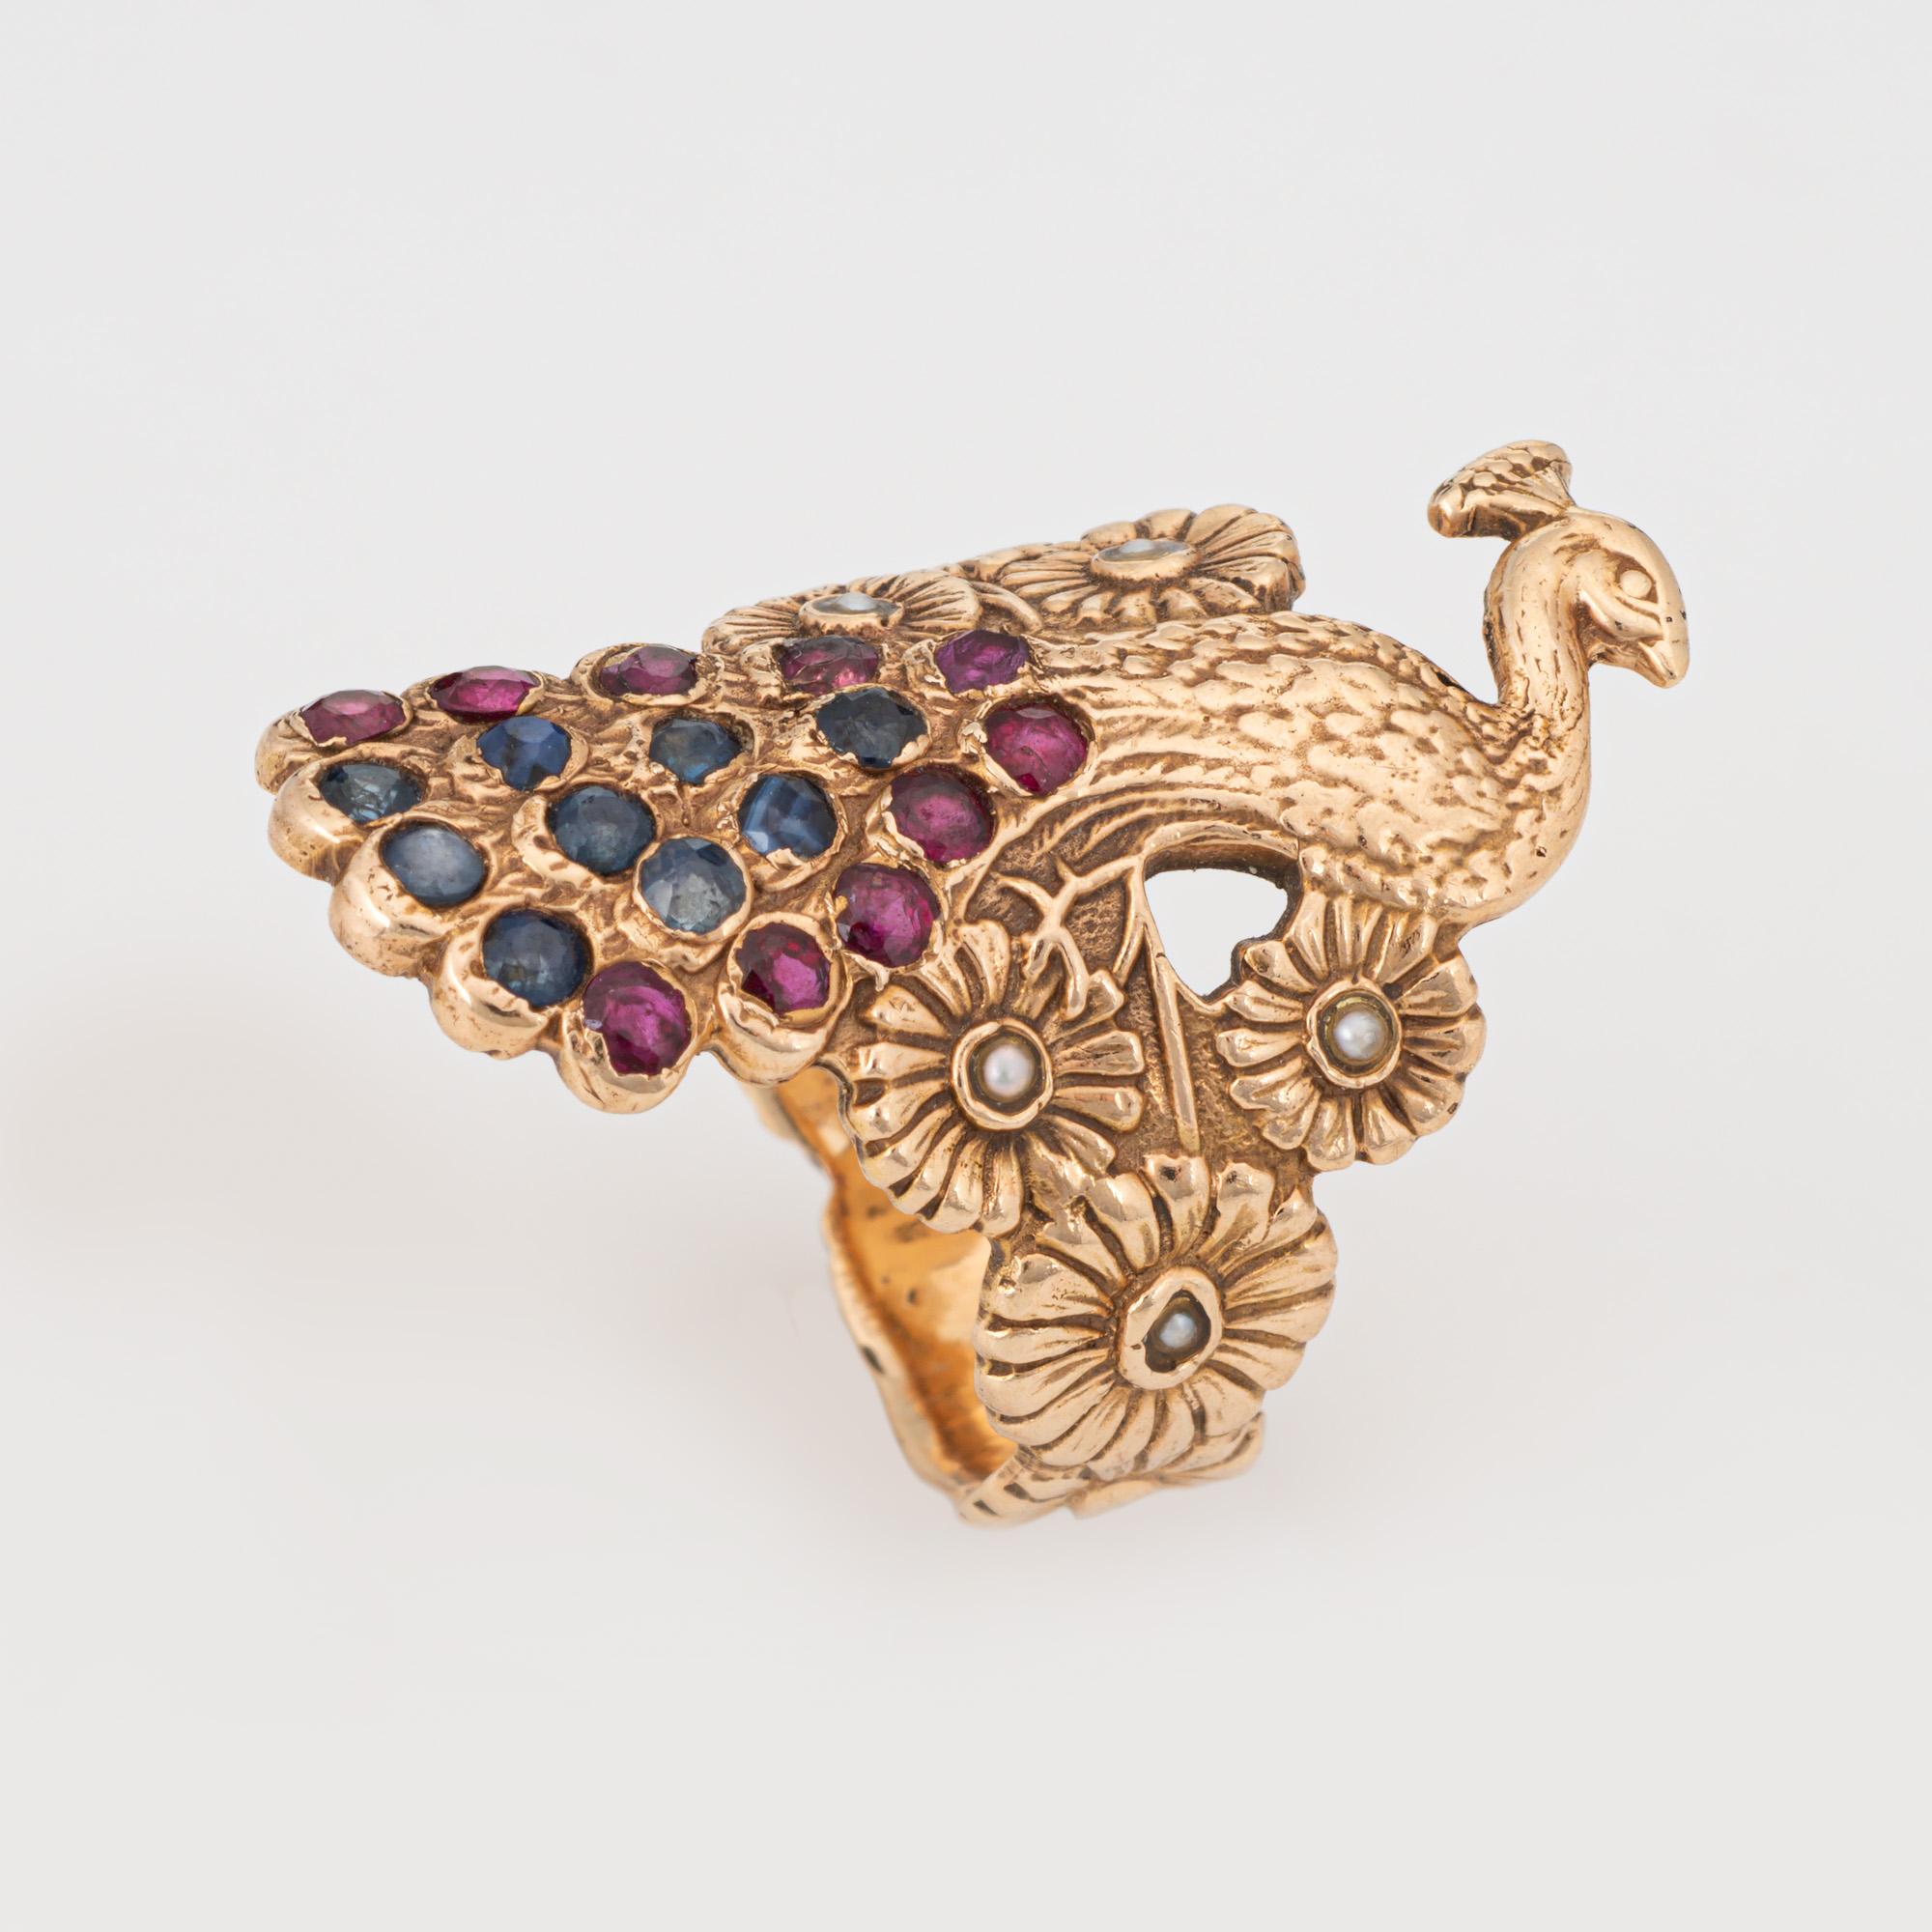 Stylish vintage Peacock ring crafted in 14 karat yellow gold. 

Rubies and sapphires measure 1.5mm each, accented with 1mm seed pearls. The gemstones are in good condition with light wear evident.   

The elaborate Peacock features sapphires and